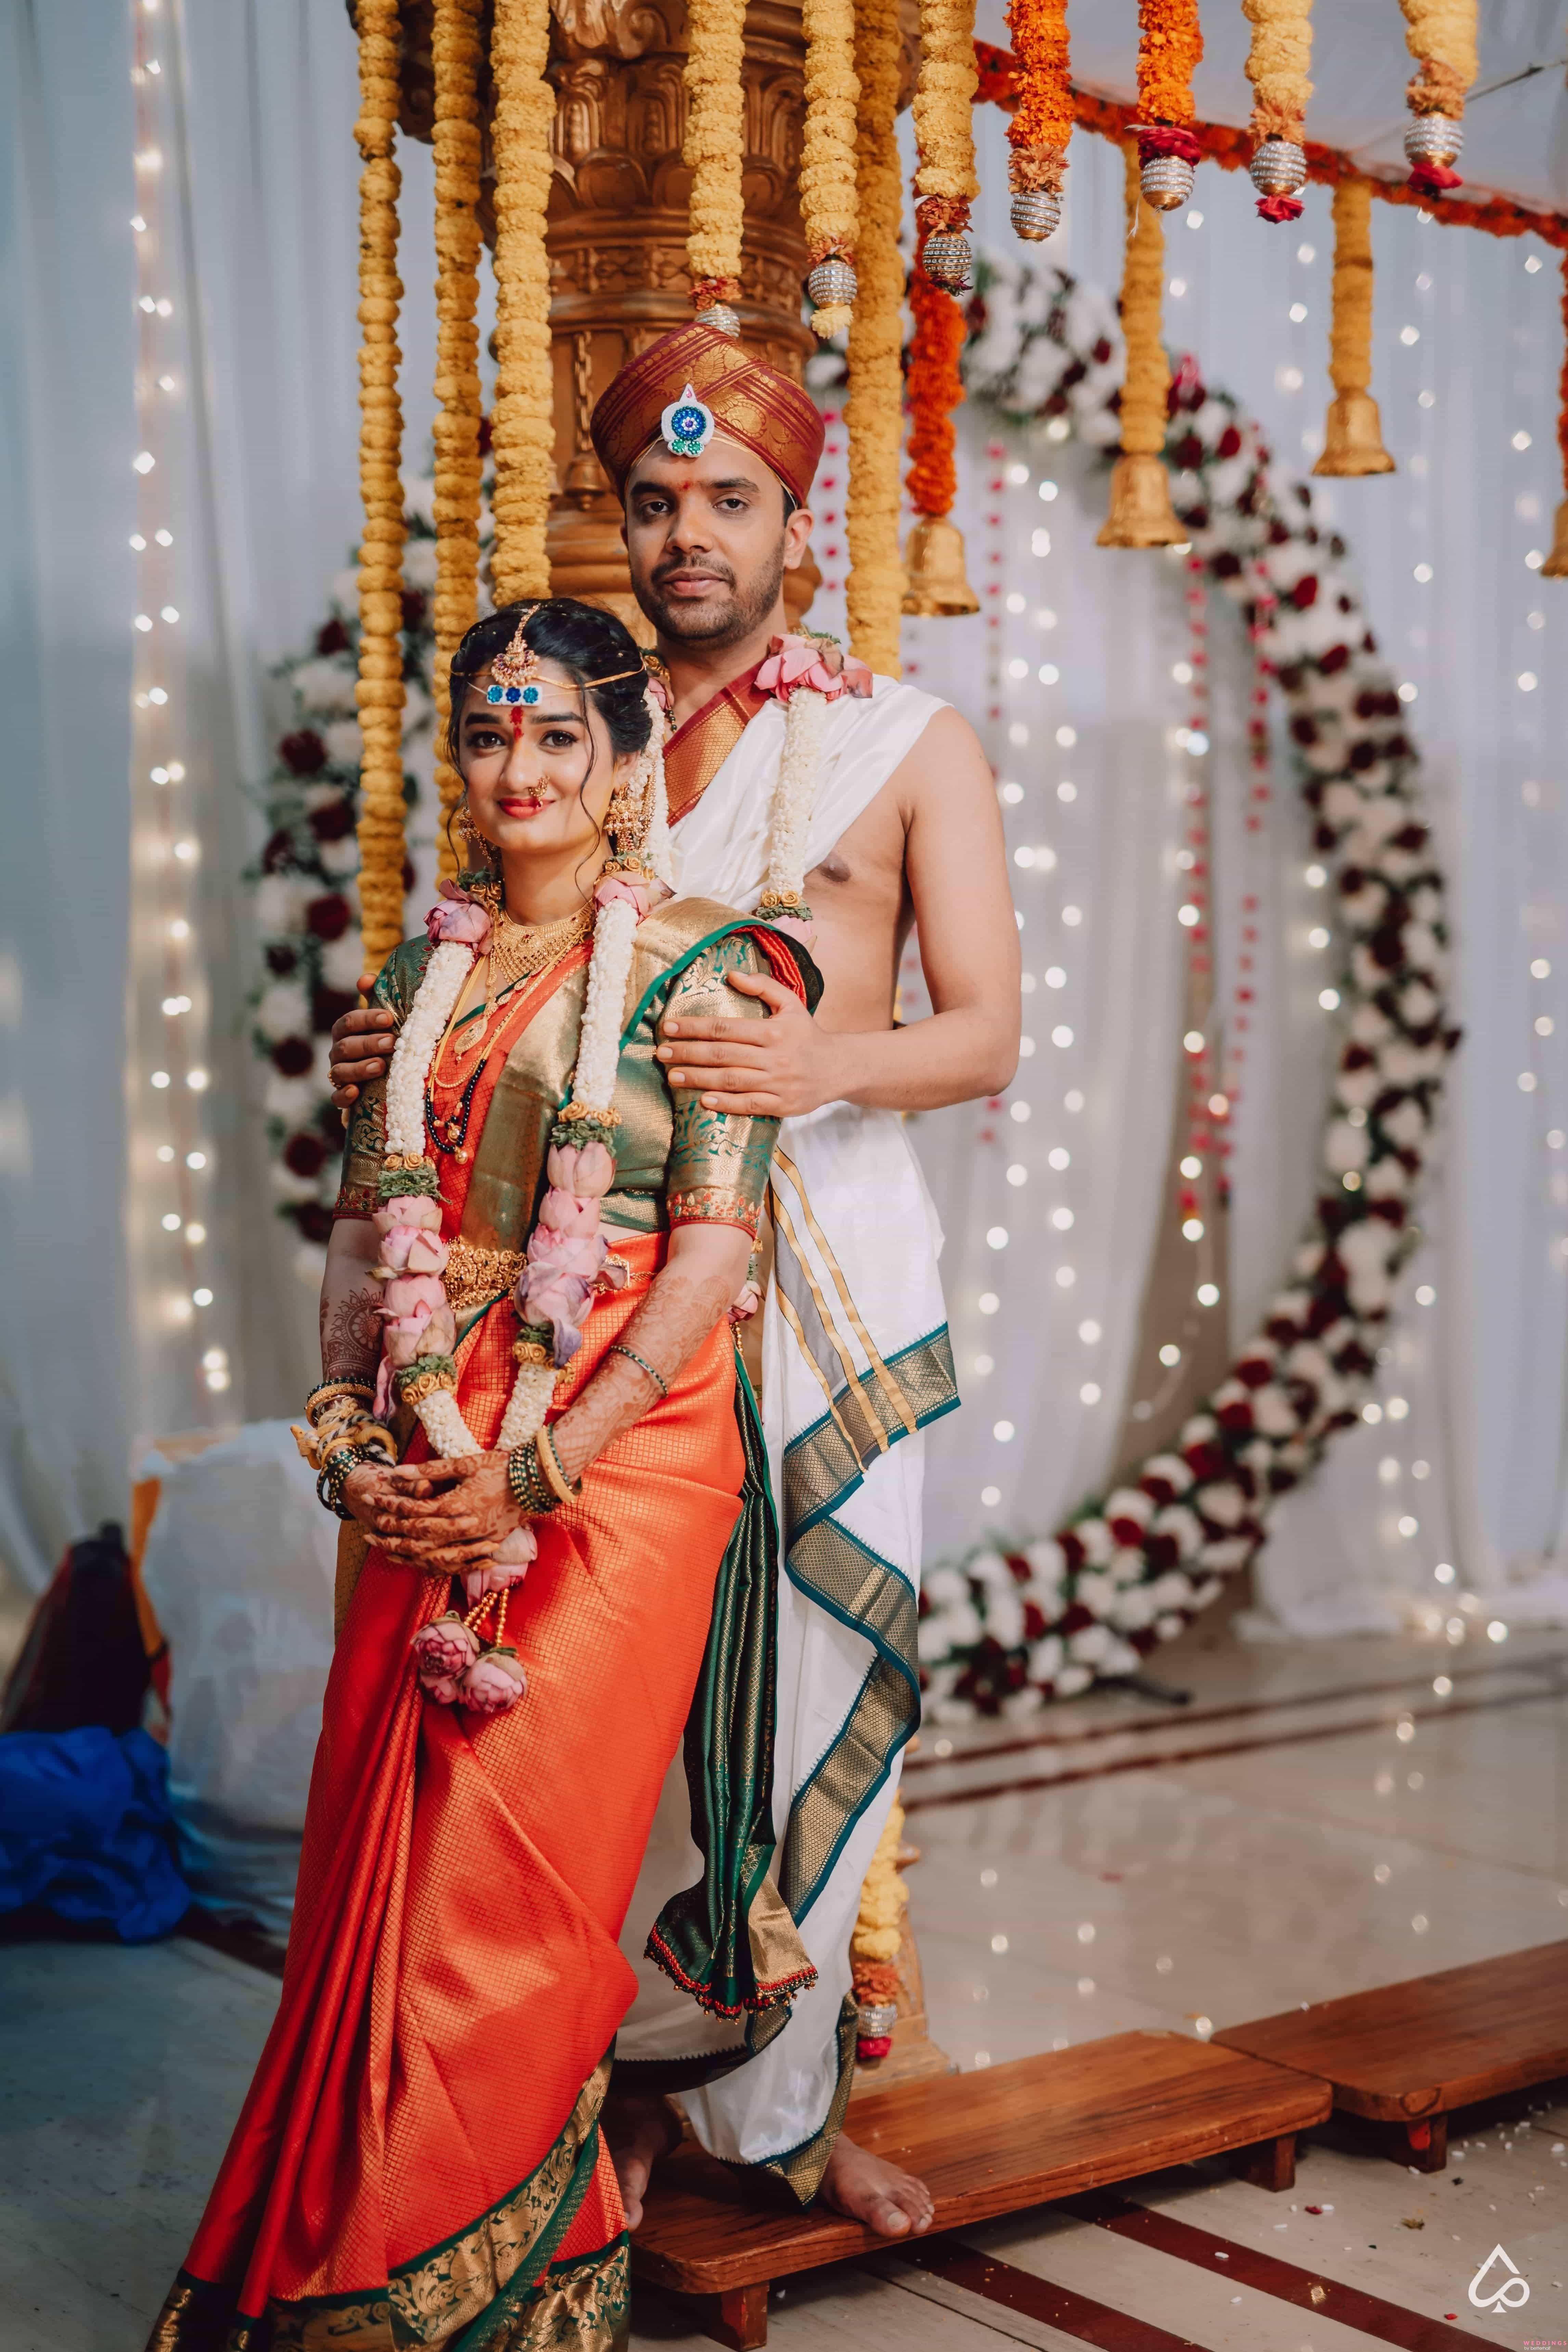 Pin by nikhil shinde on new Bride and groom 2021 | Wedding couple poses,  Indian wedding photography couples, Indian wedding photography poses